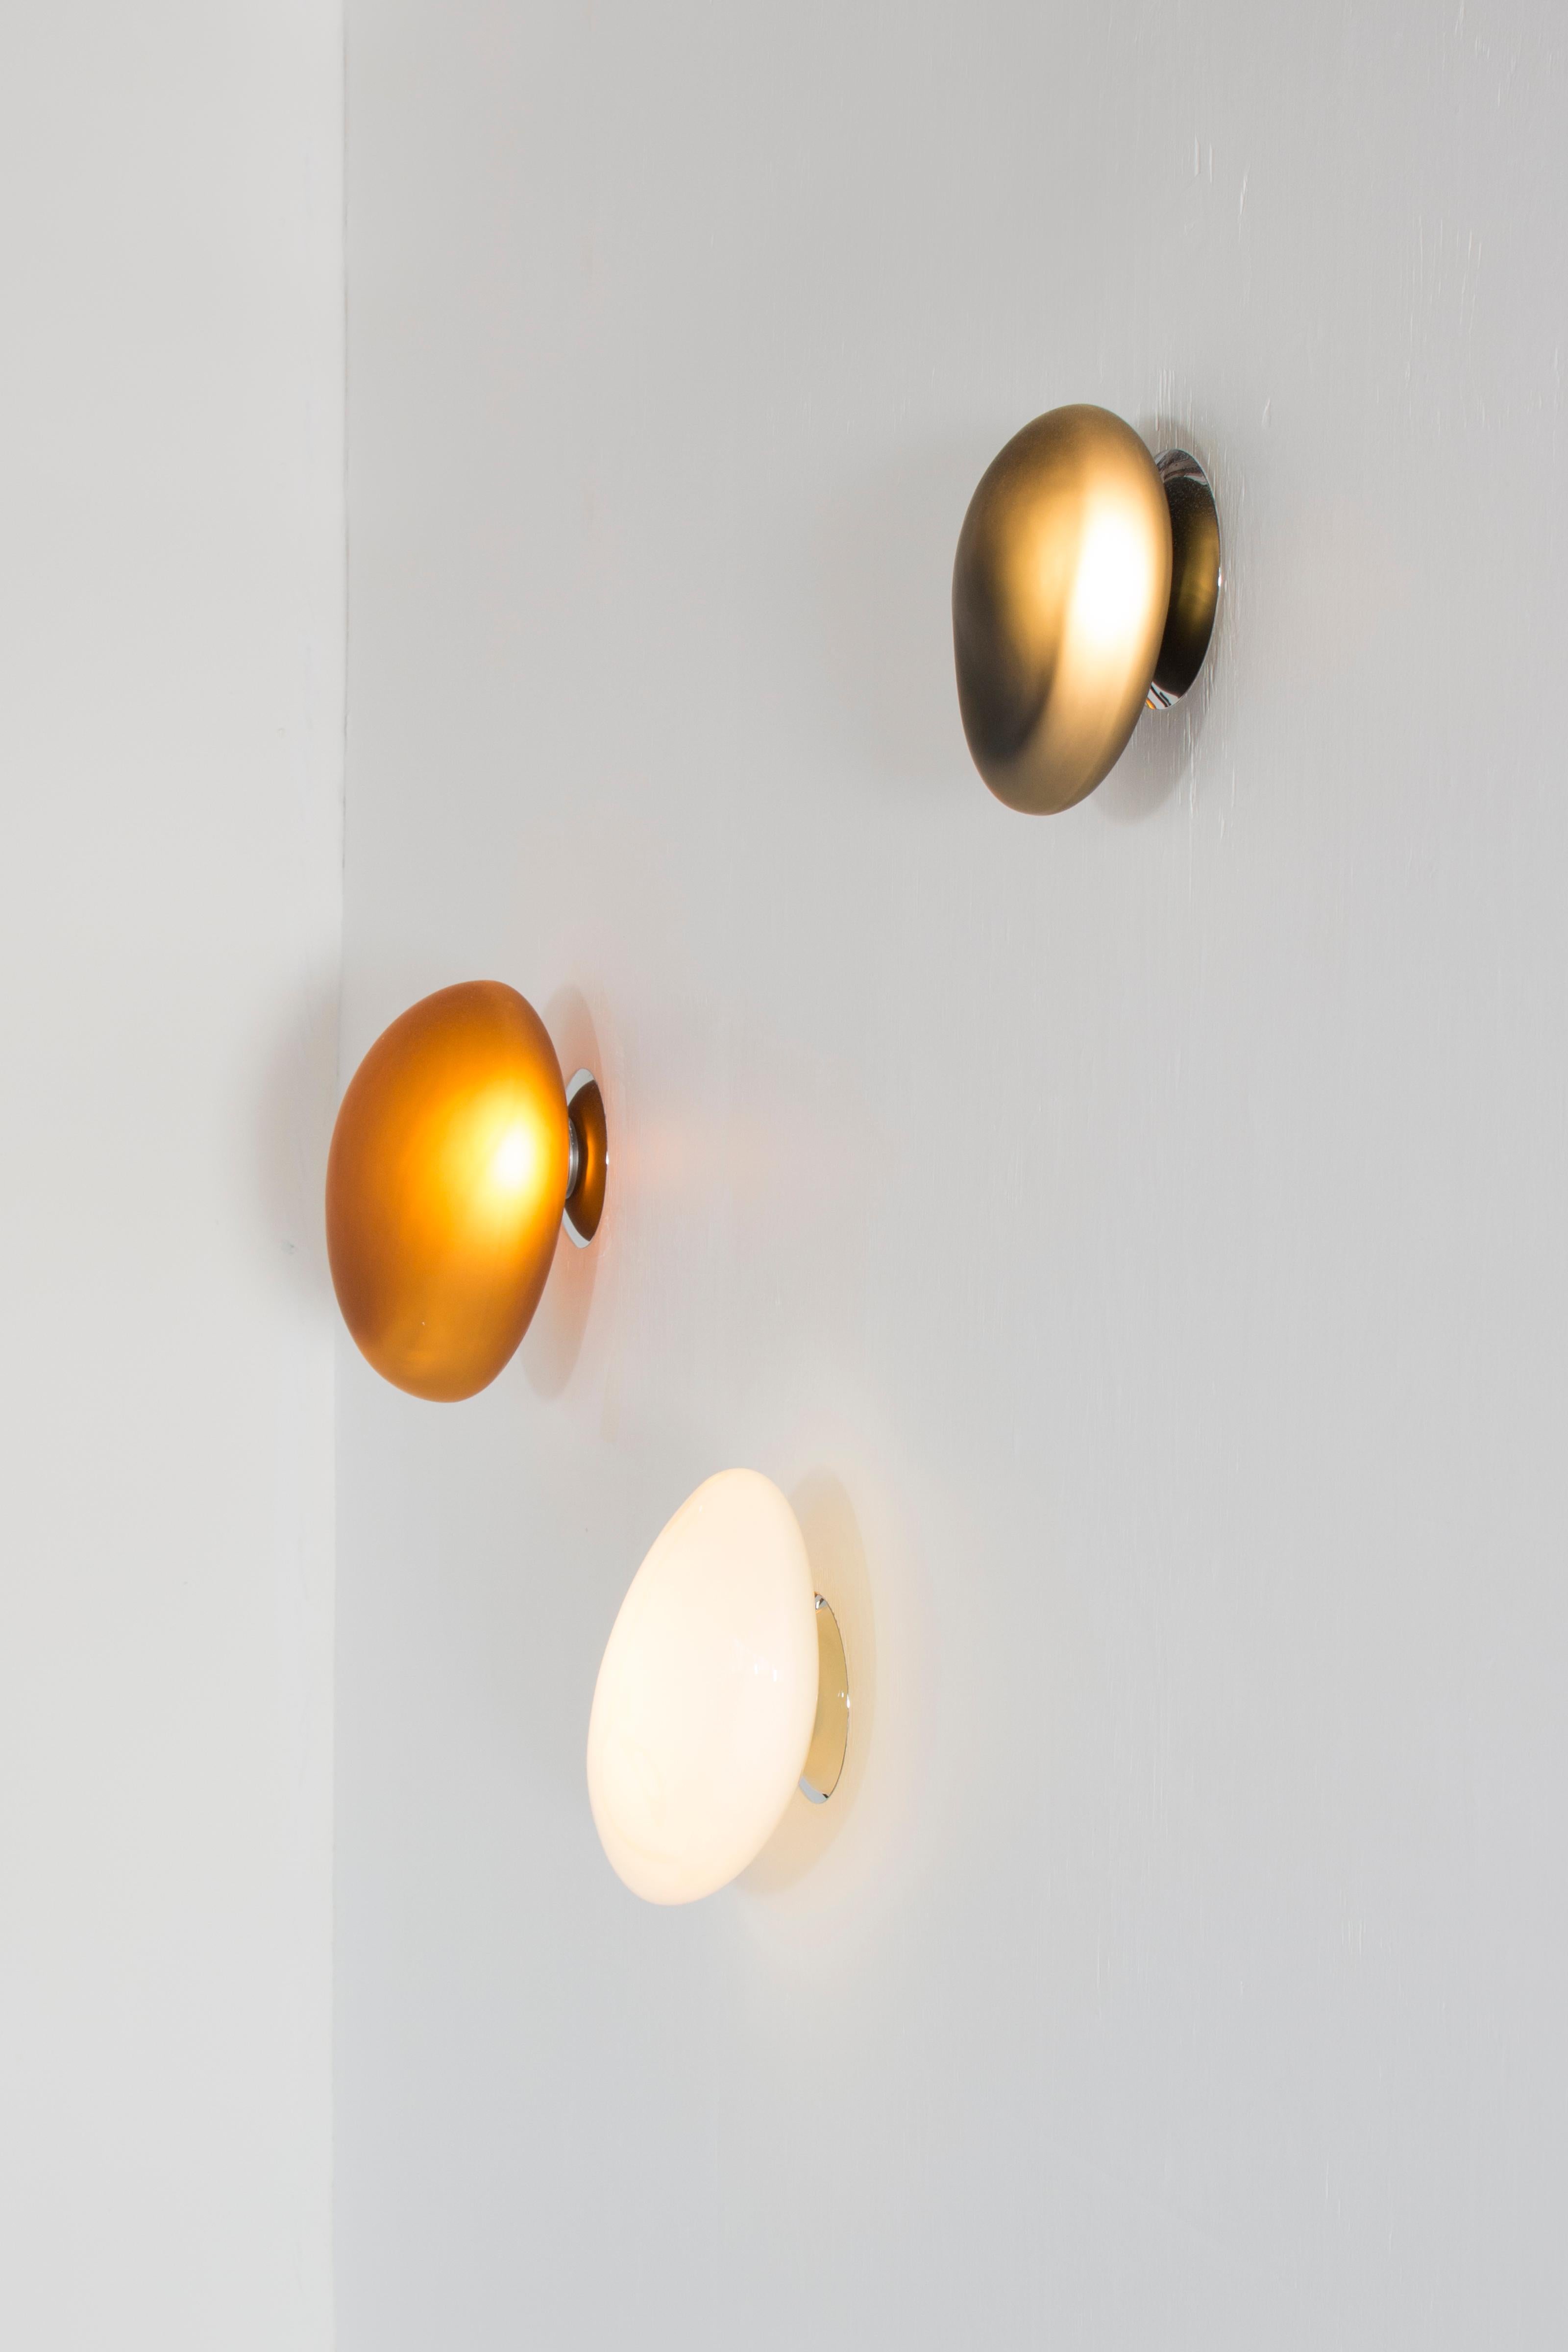 Organic Modern Contemporary Wall Lamp 'Pebble' by Andlight, Shape A, Citrine For Sale